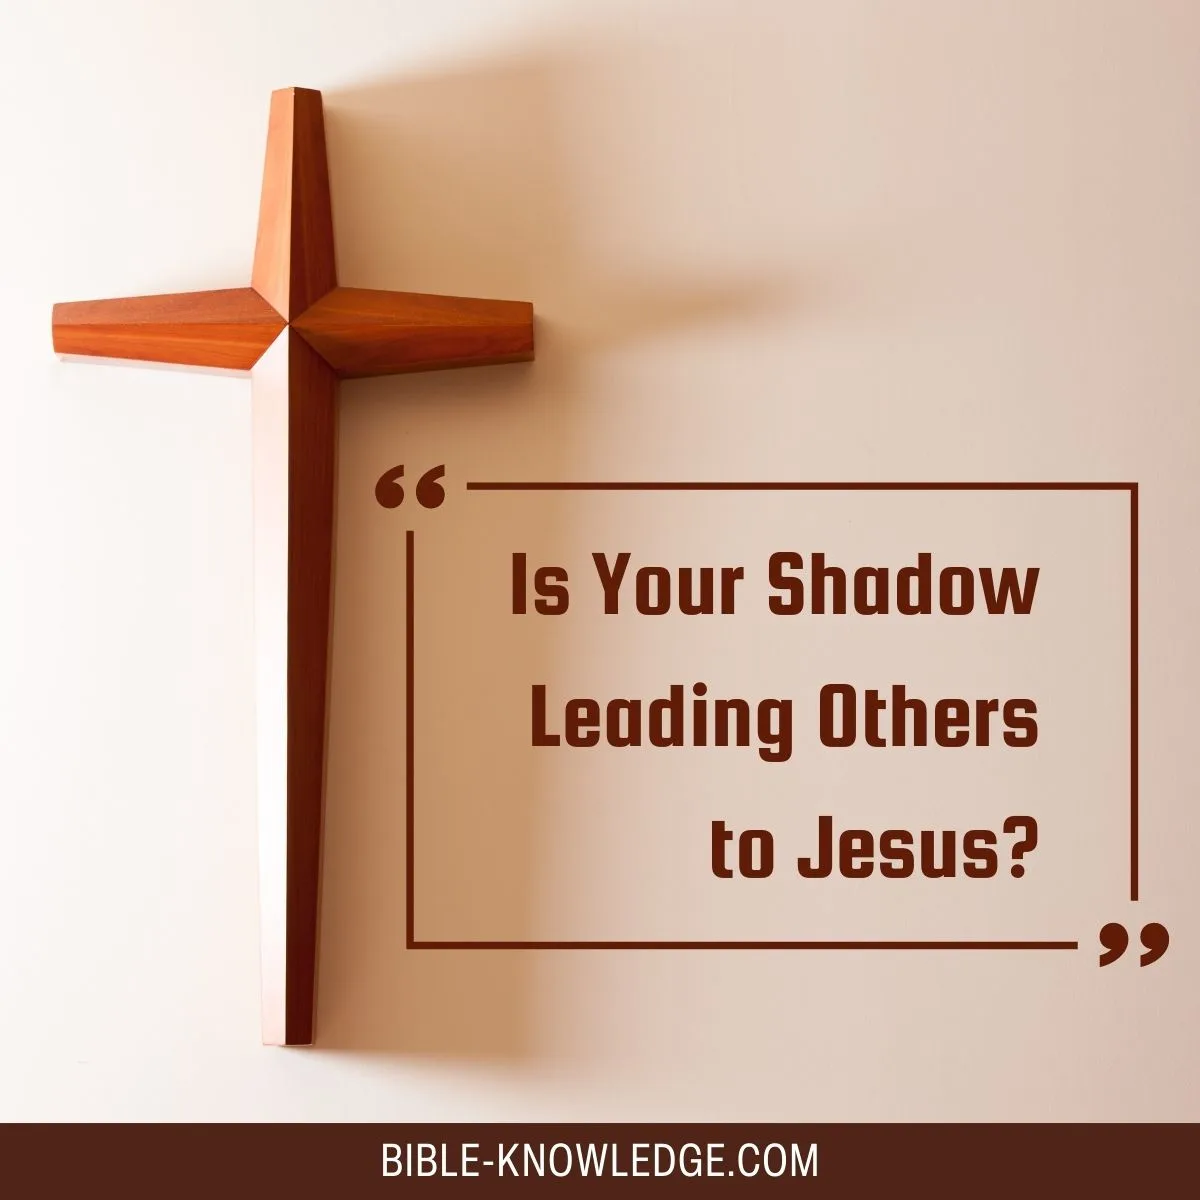 Is Your Shadow Leading Others to Jesus?